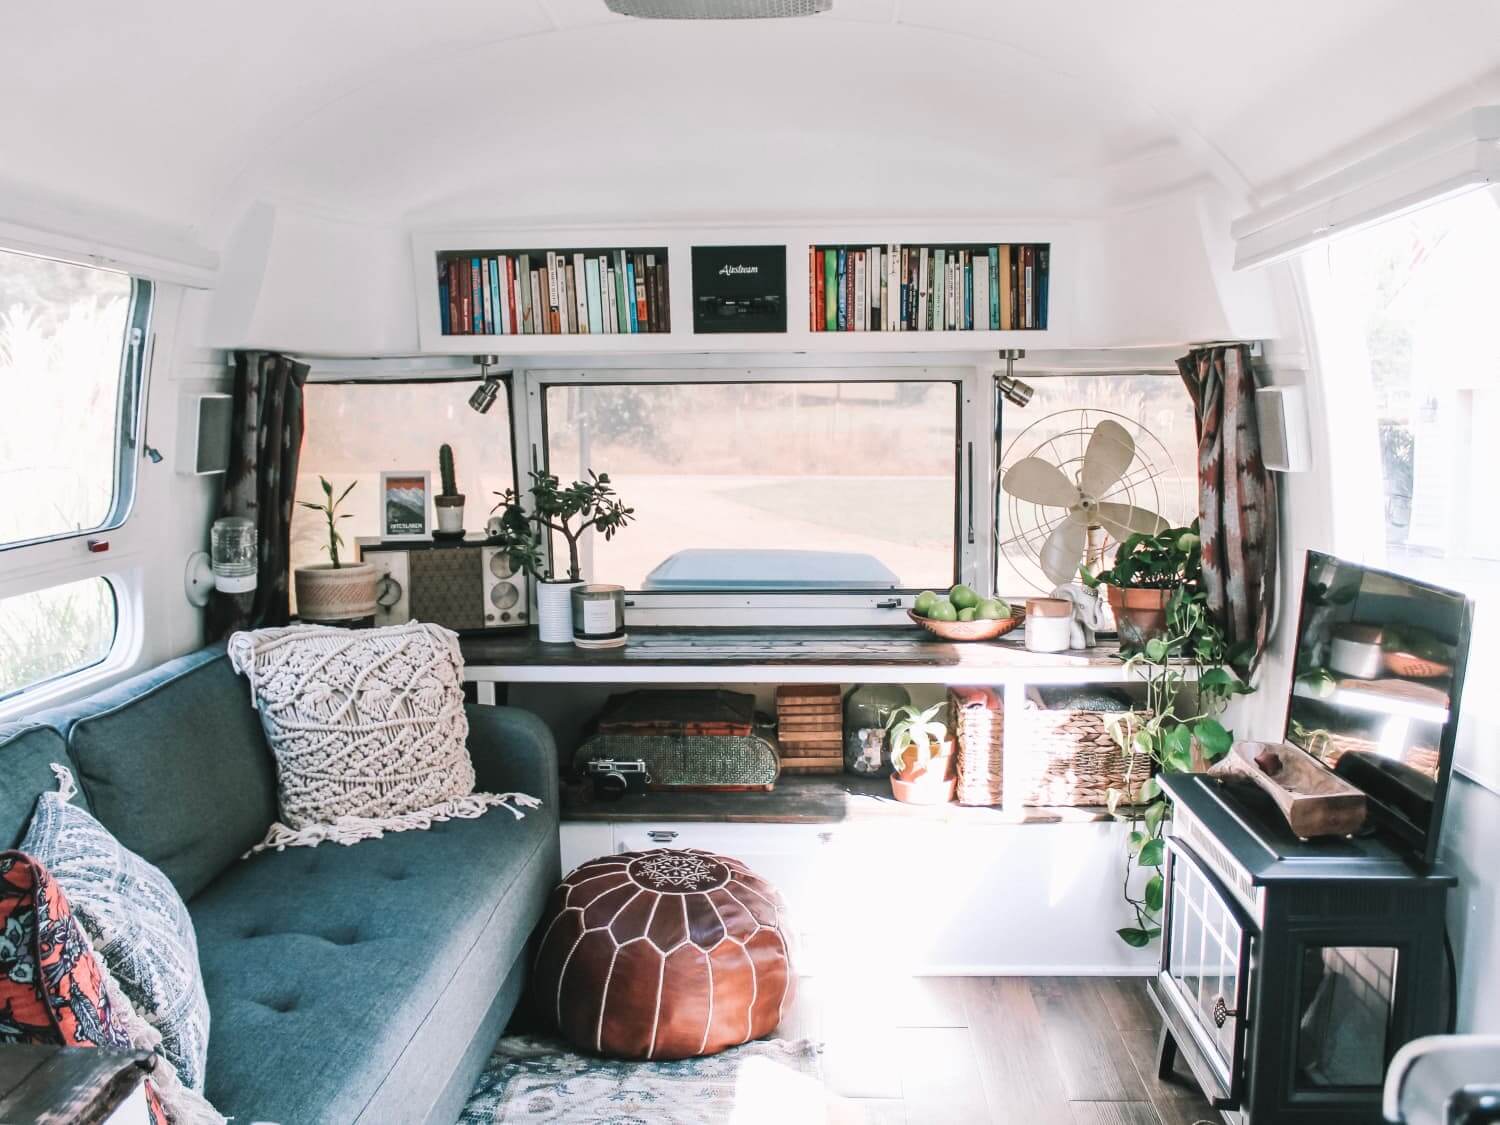 6 Practical Ways to Maximize Your Tiny Home